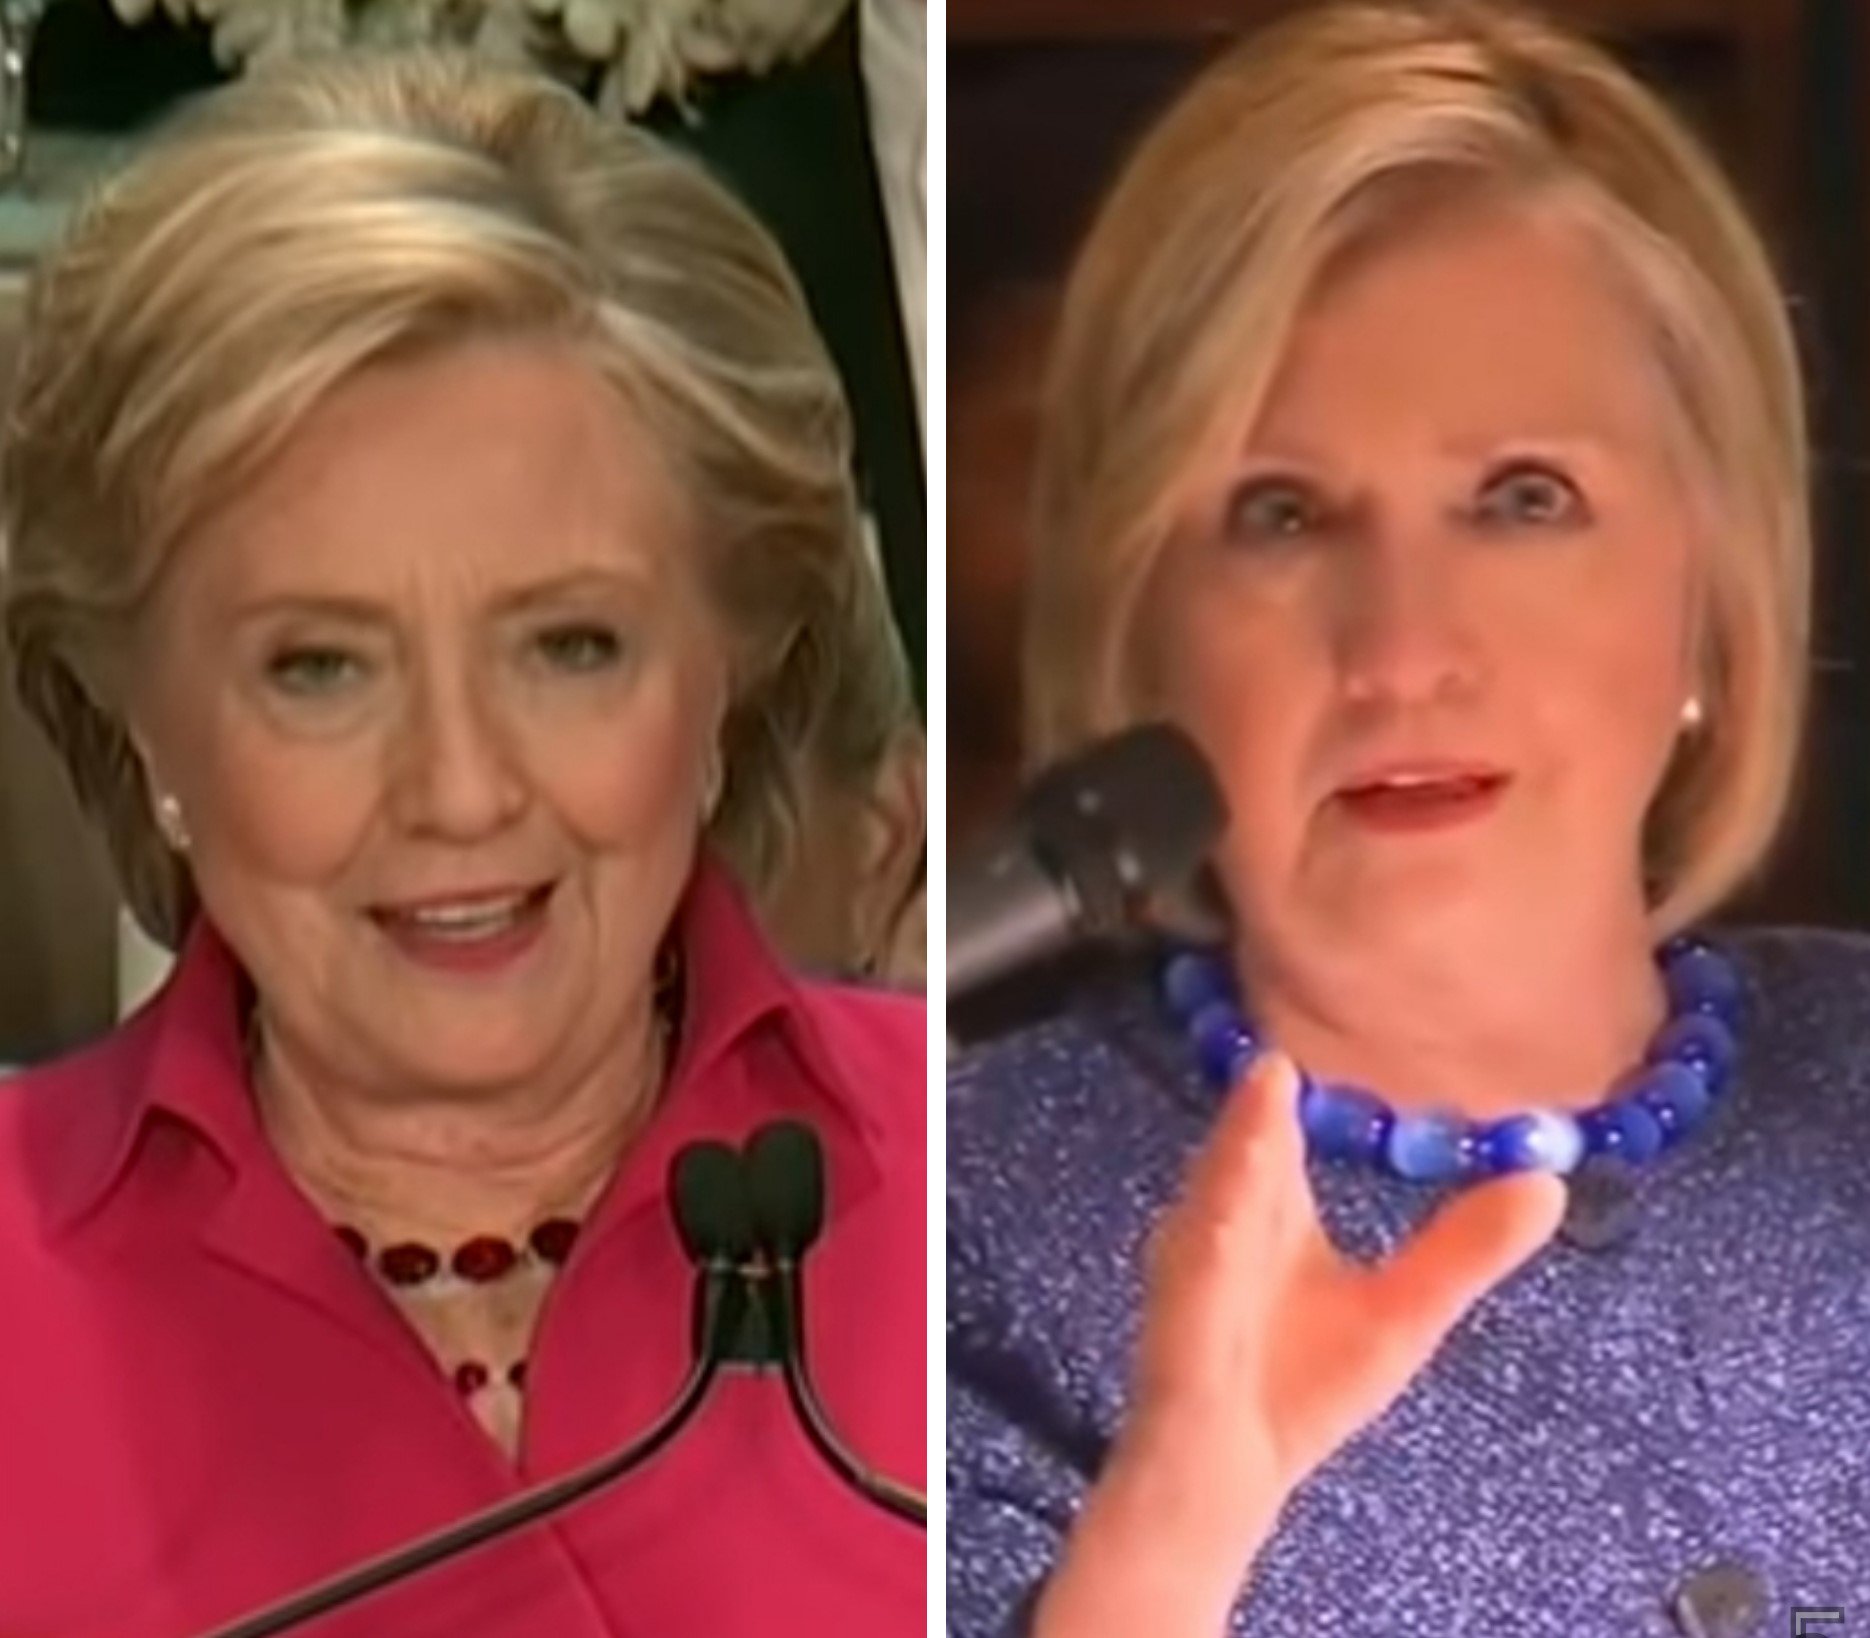 Mrs. Claus on Twitter: "#HillaryClinton in 2016 on left, in 2019 on right? What's wrong with this???#WillTheRealHillaryPleaseStandUp… "